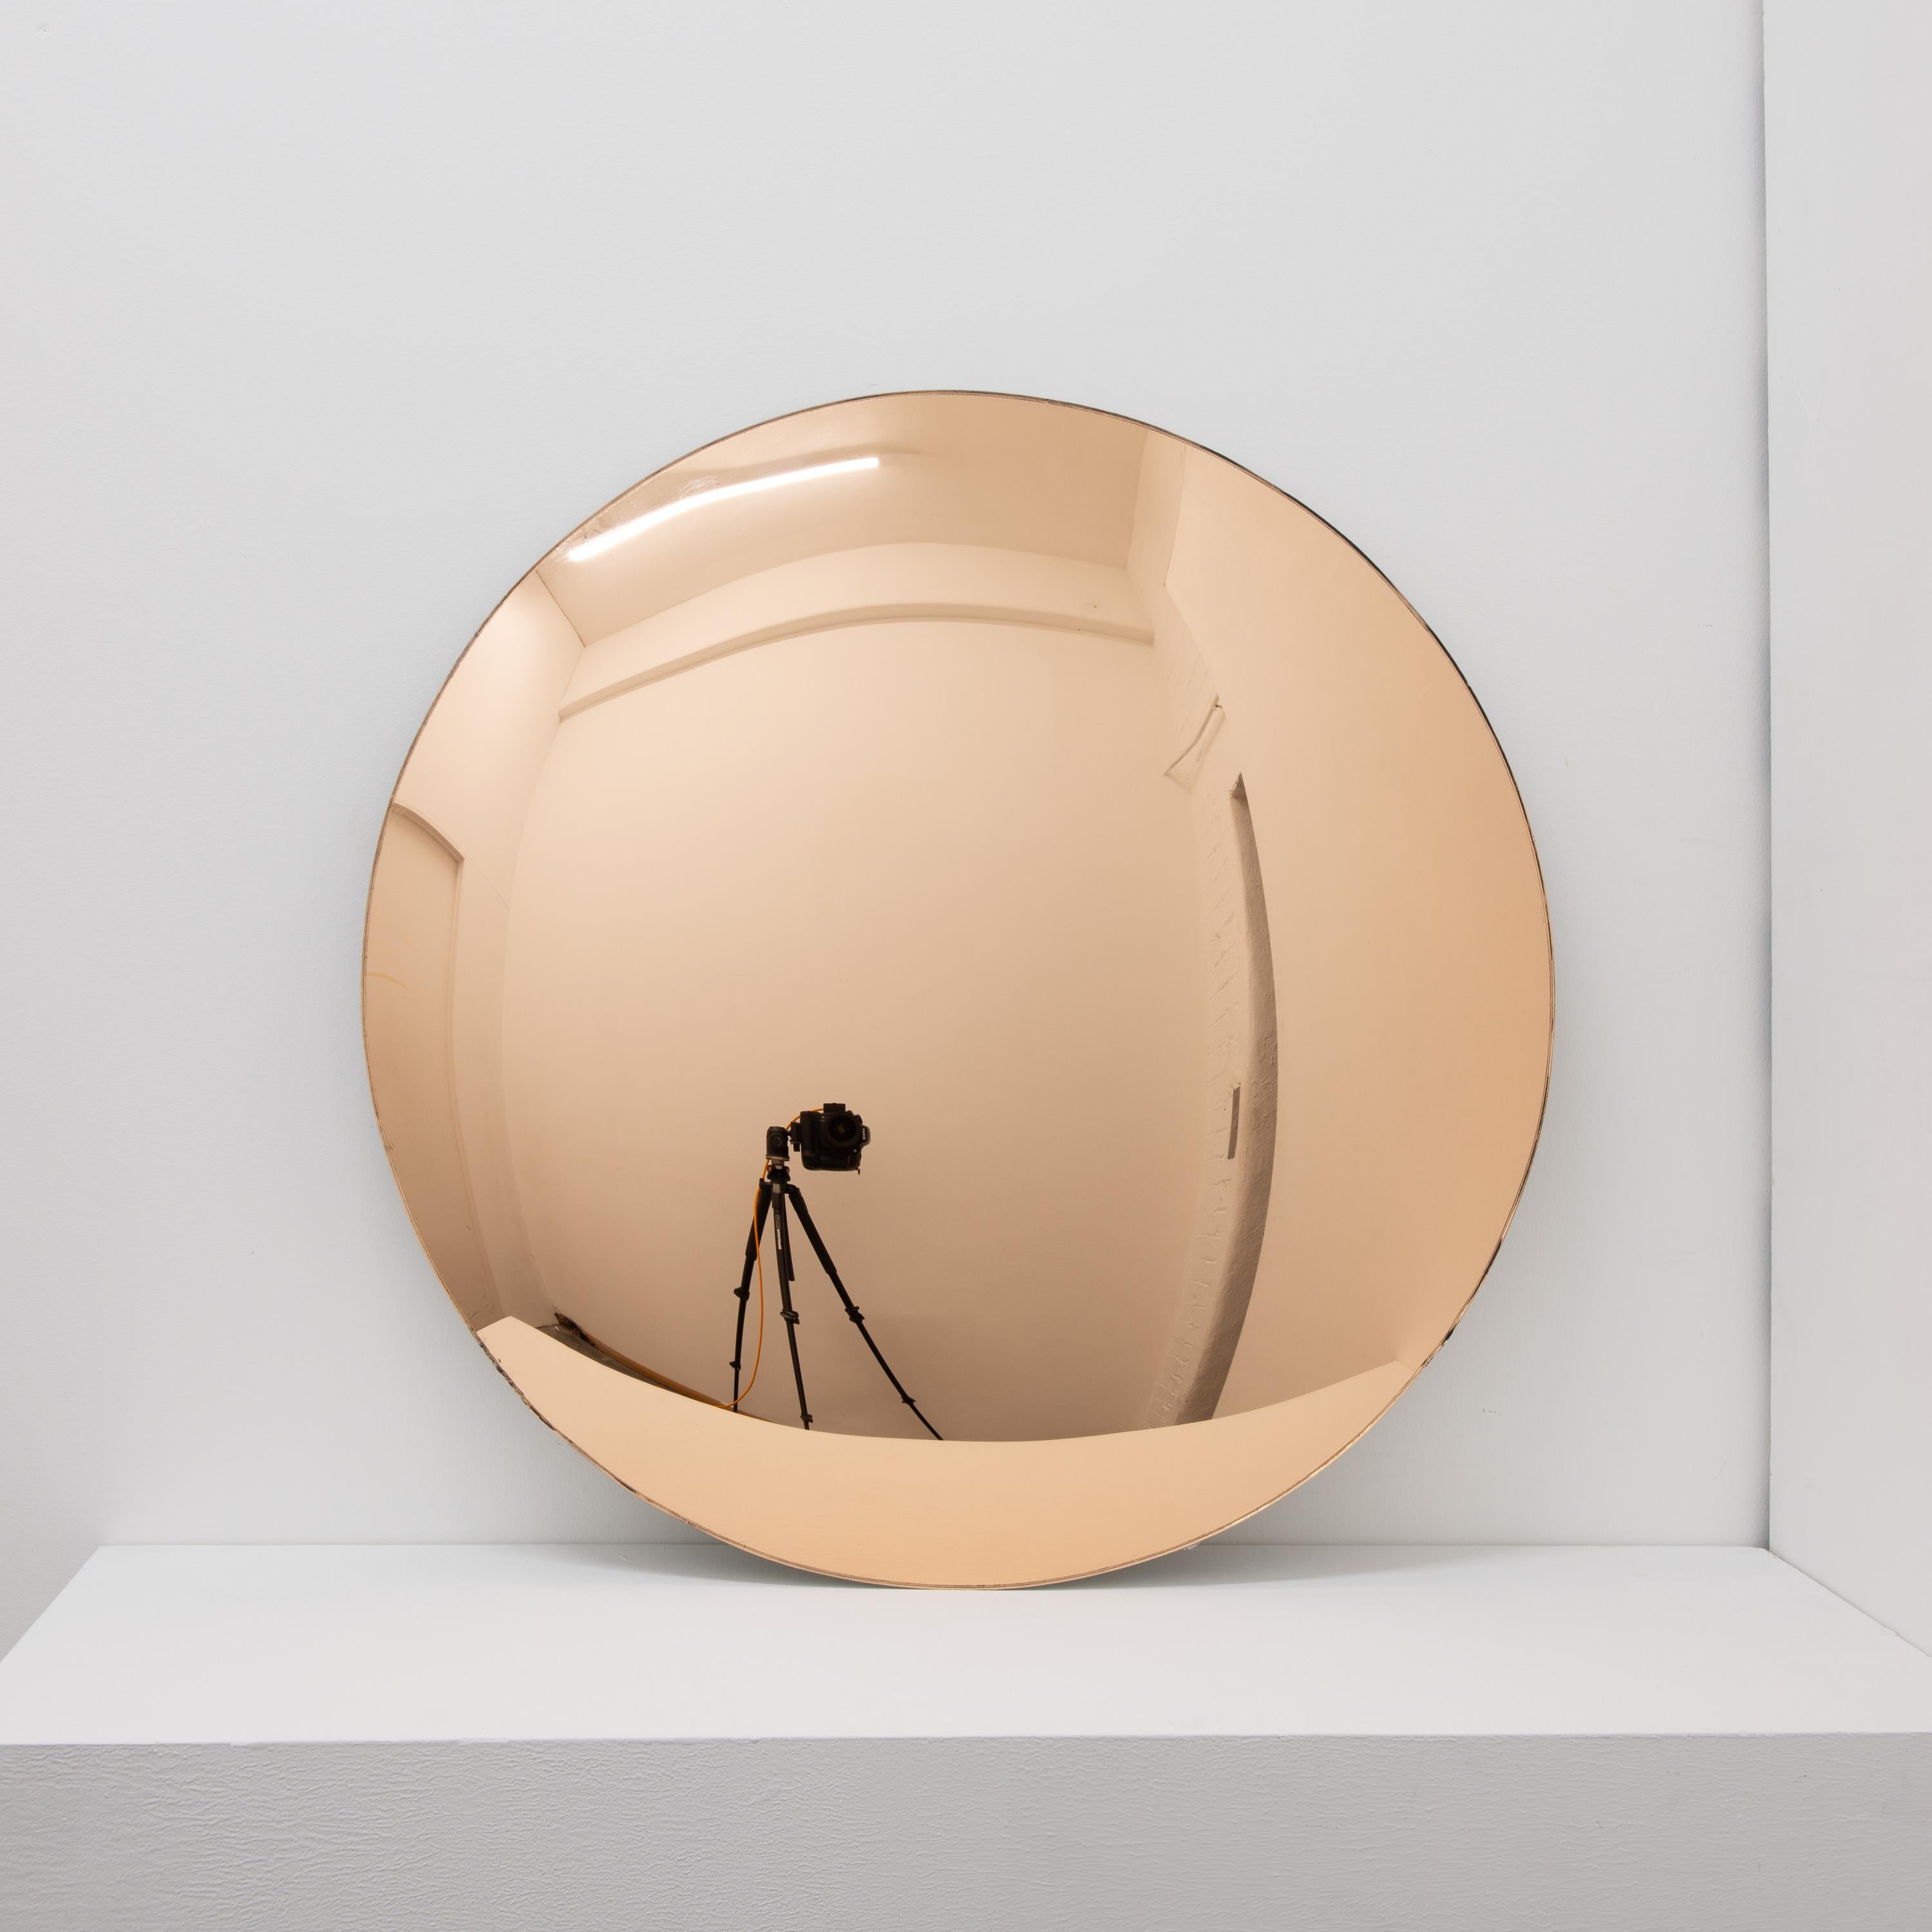 Stunning rose gold tinted convex frameless mirror.
Optional brass clips.

Each Orbis™ convex mirror is designed and handcrafted in London, UK. Slight variations in sizes and imperfections on edges and surface finishes are characteristics of such